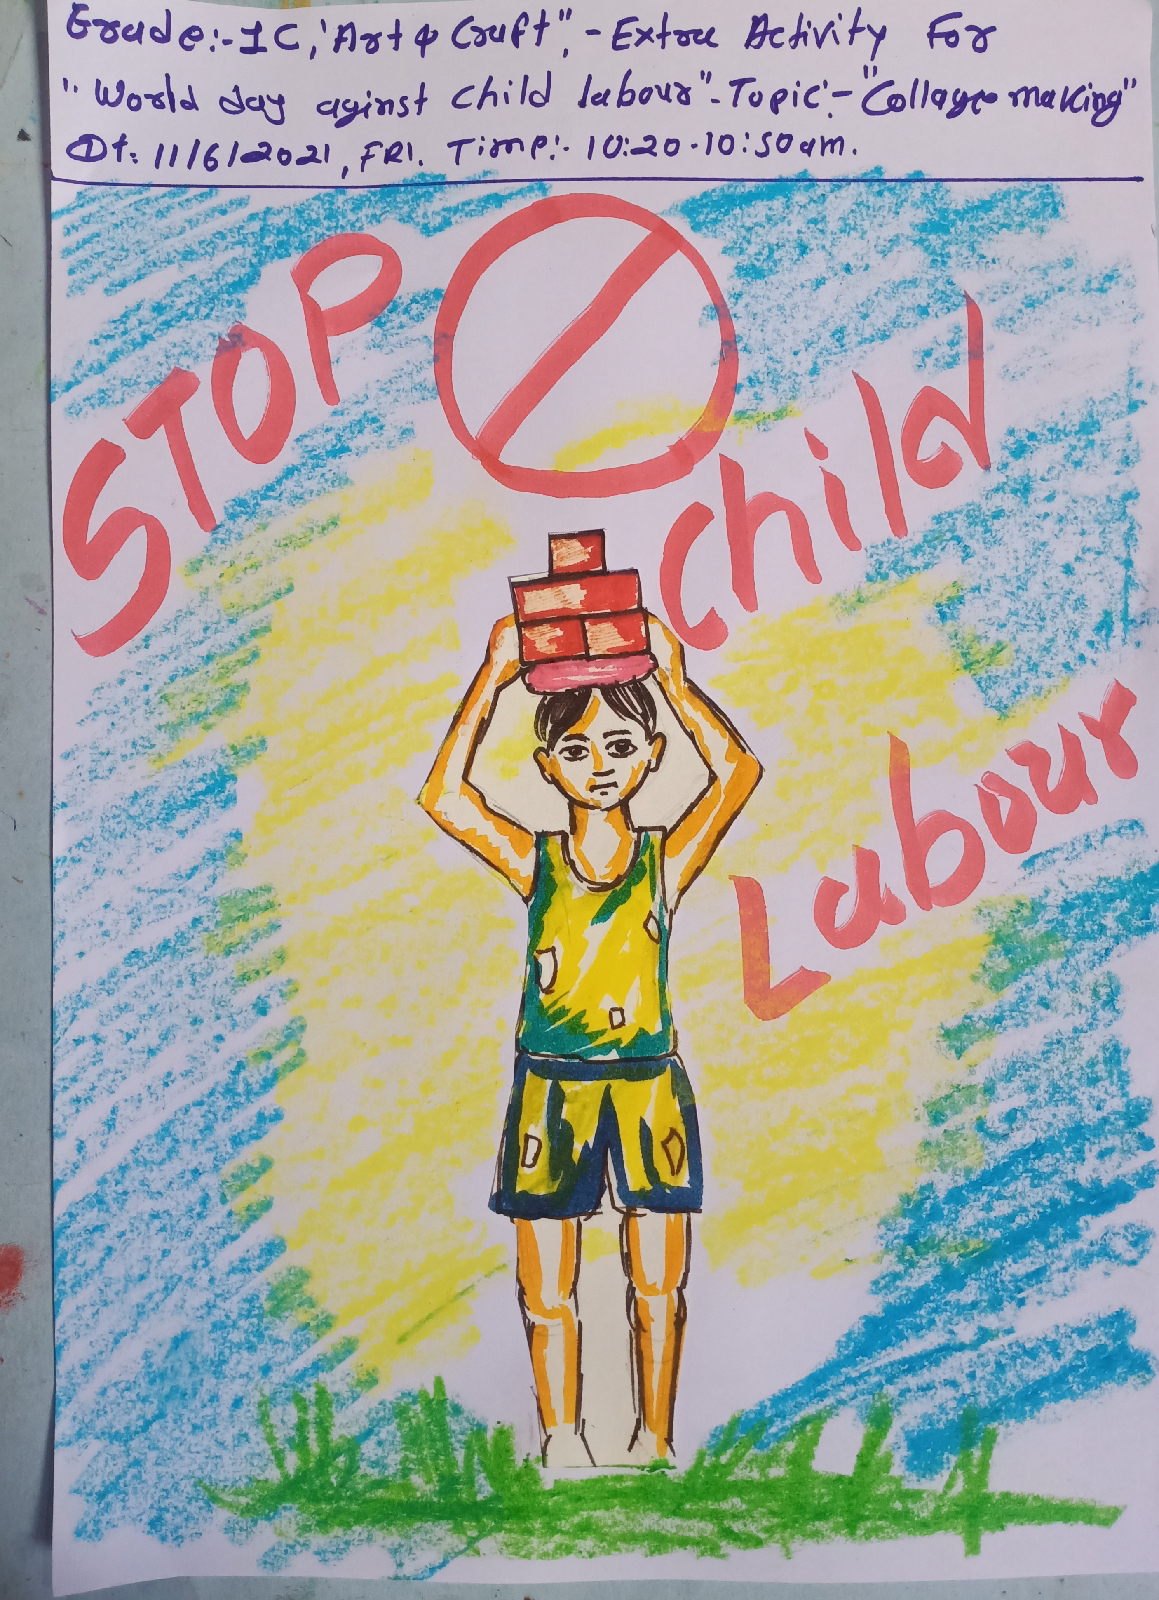 Anti child labour day 2023 Template | PosterMyWall